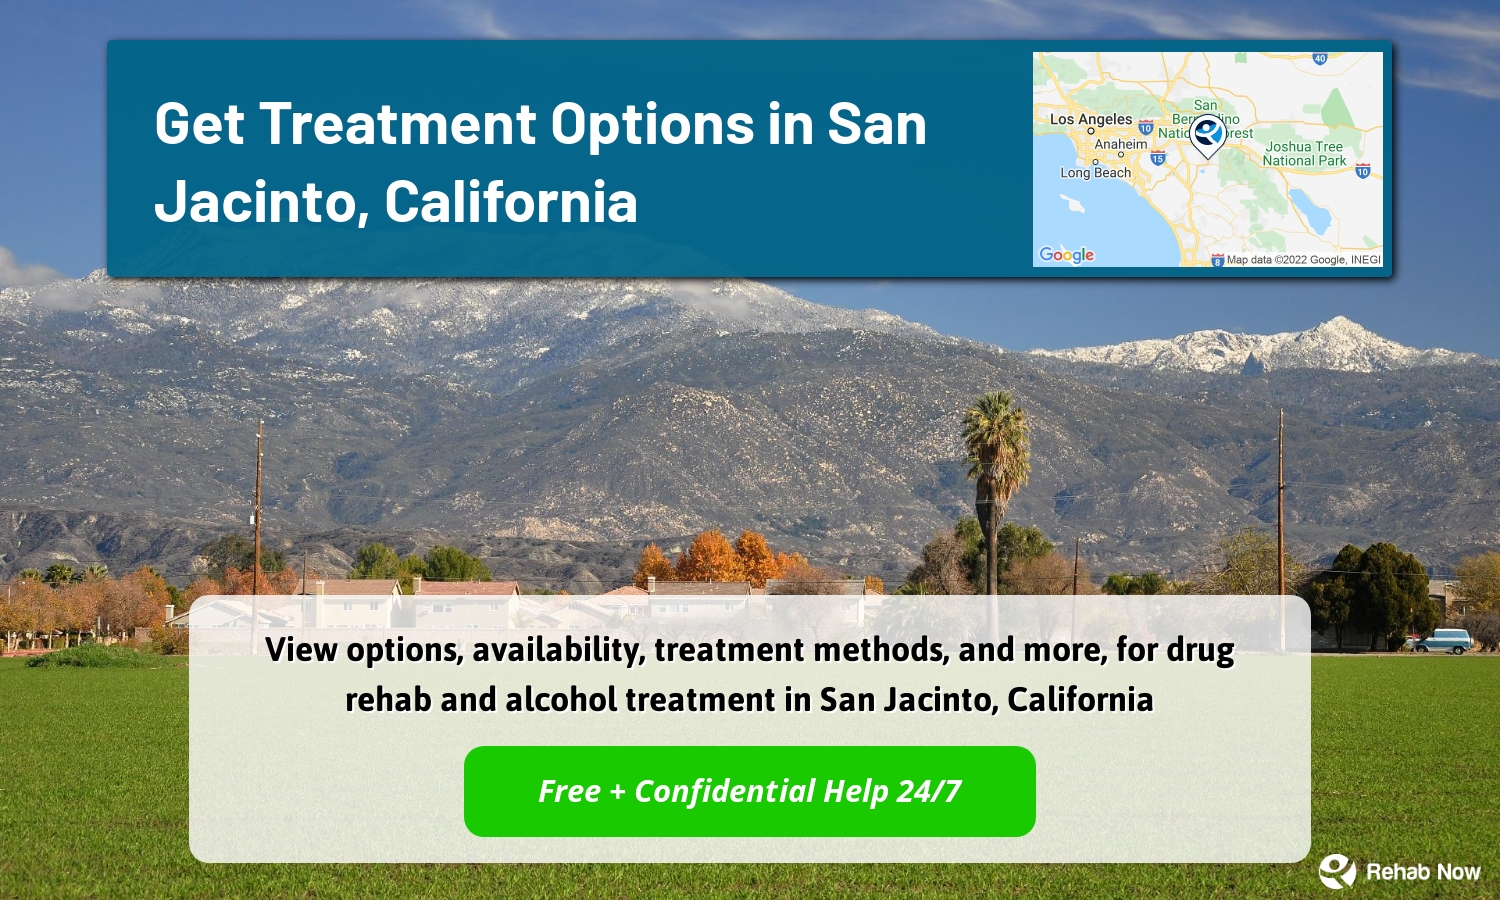 View options, availability, treatment methods, and more, for drug rehab and alcohol treatment in San Jacinto, California